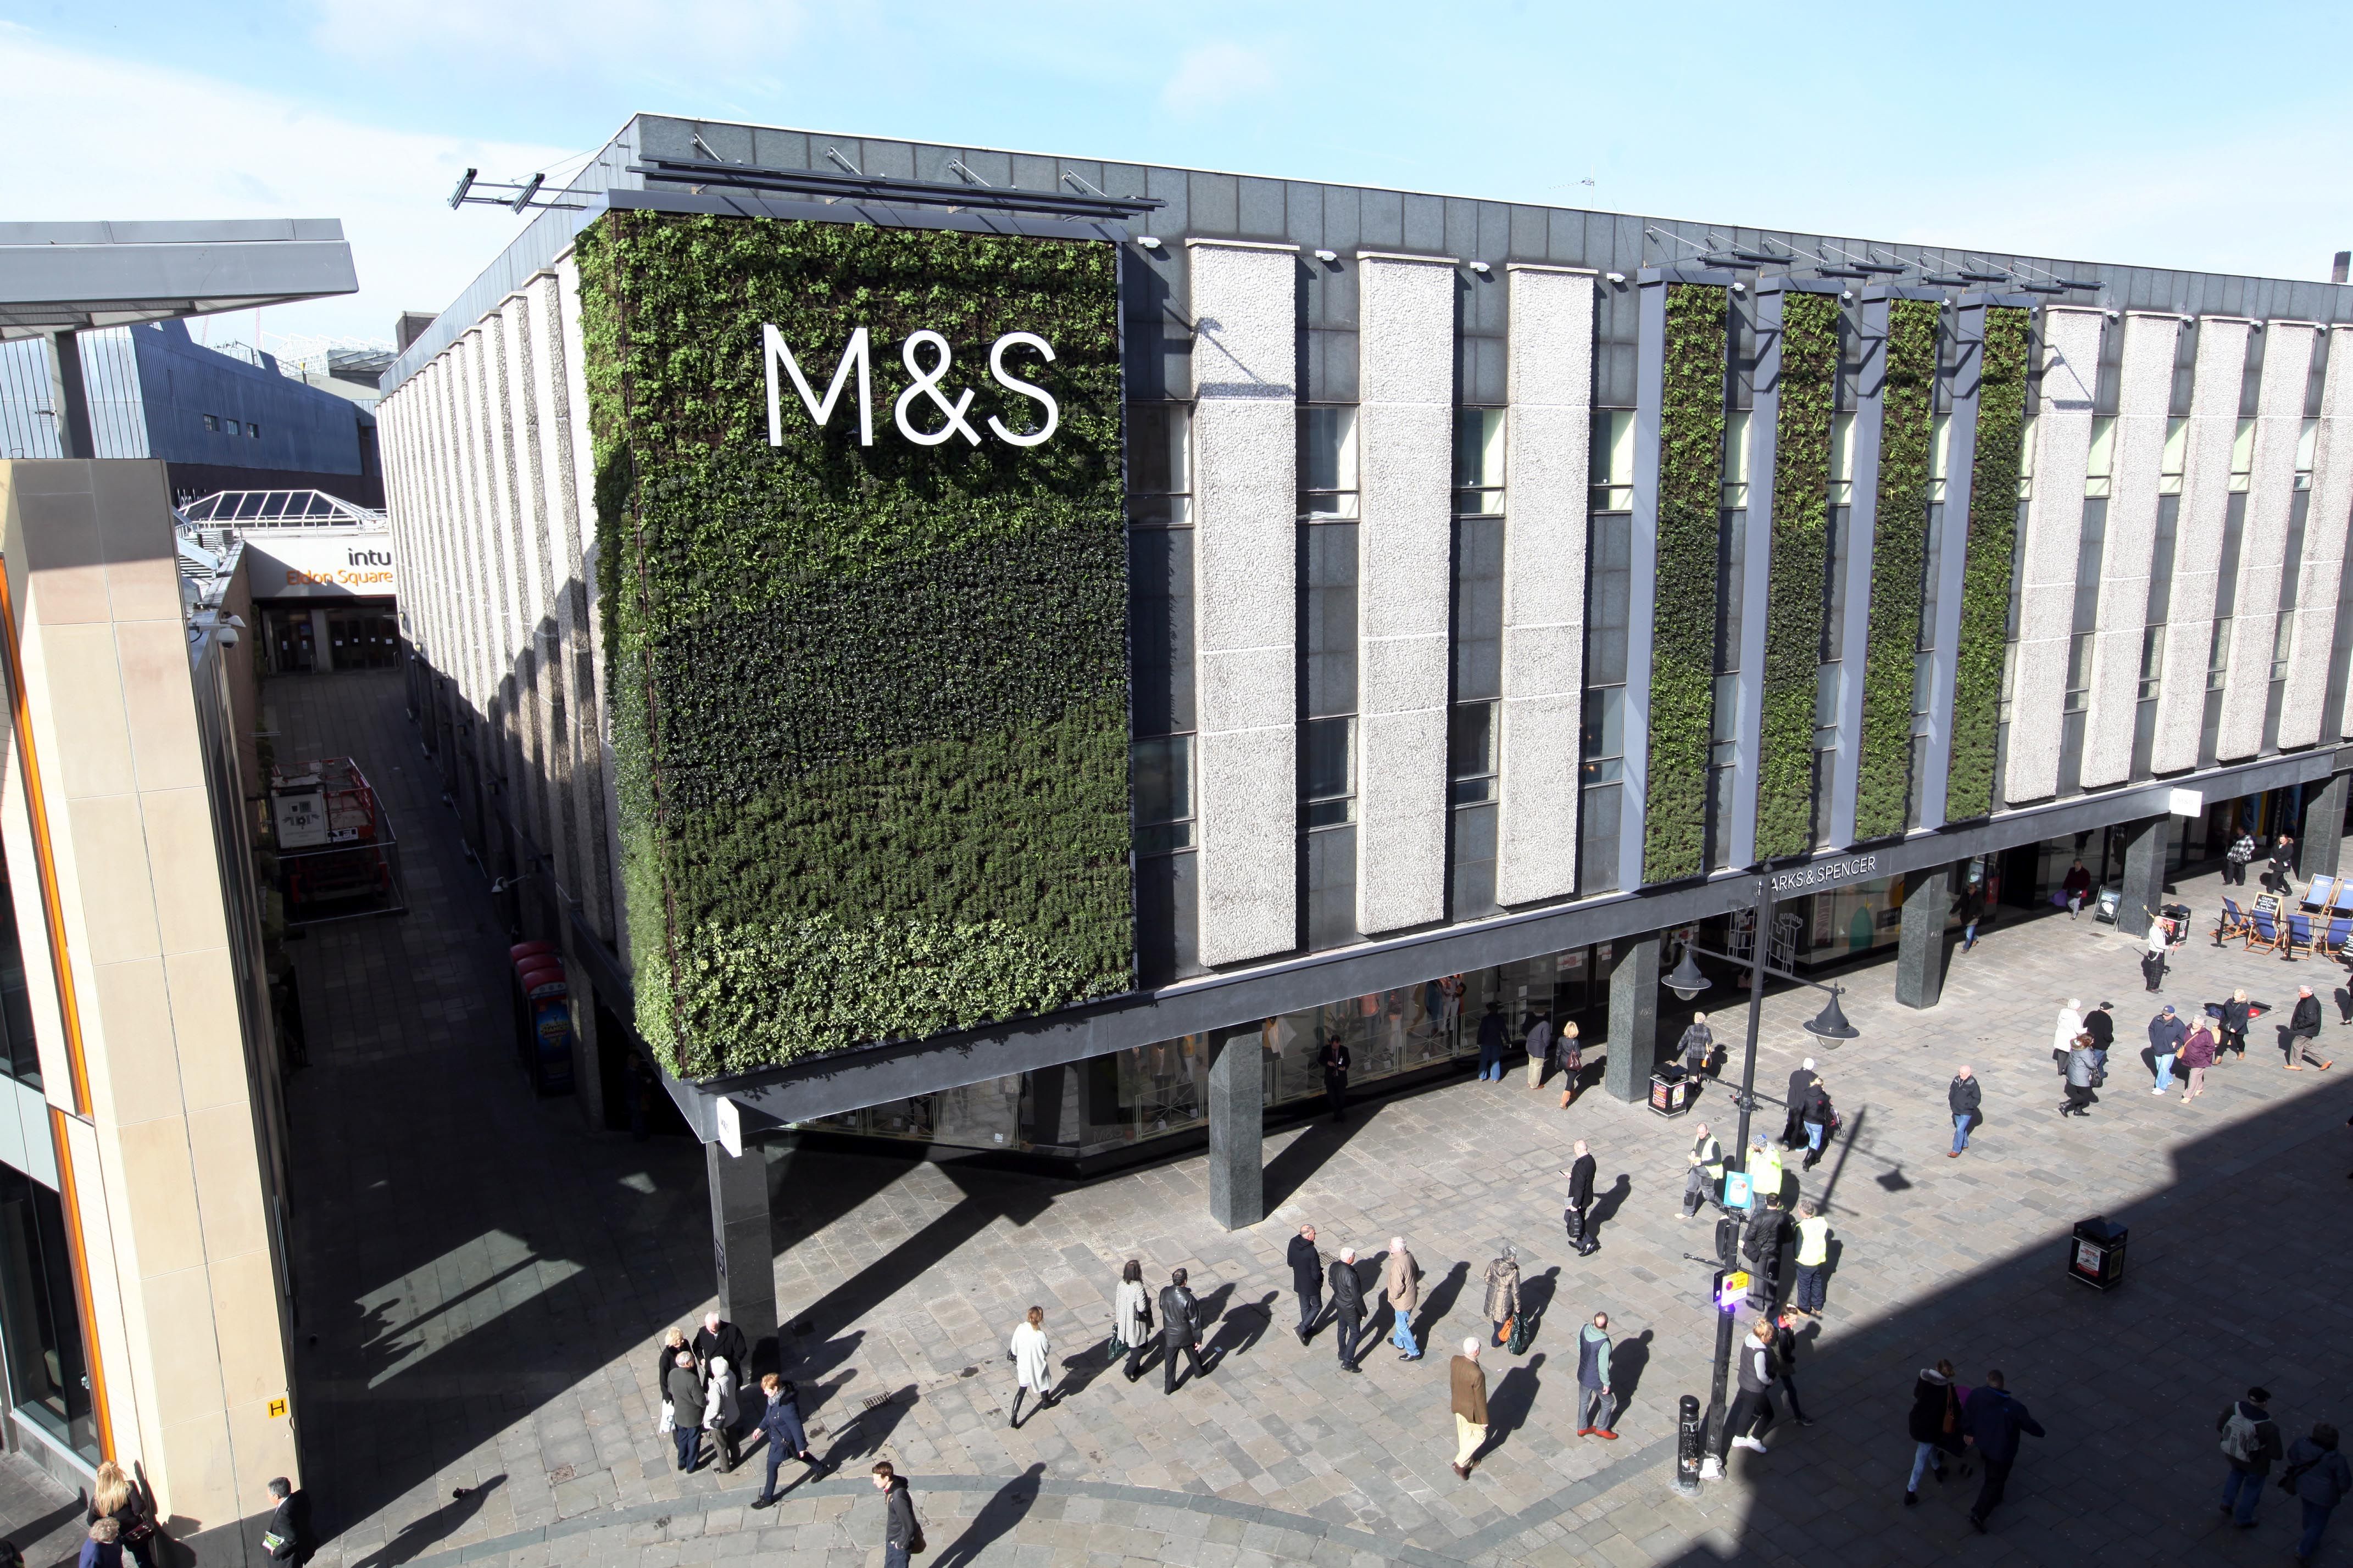 M&S Family Matters index sees rising interest in health food products